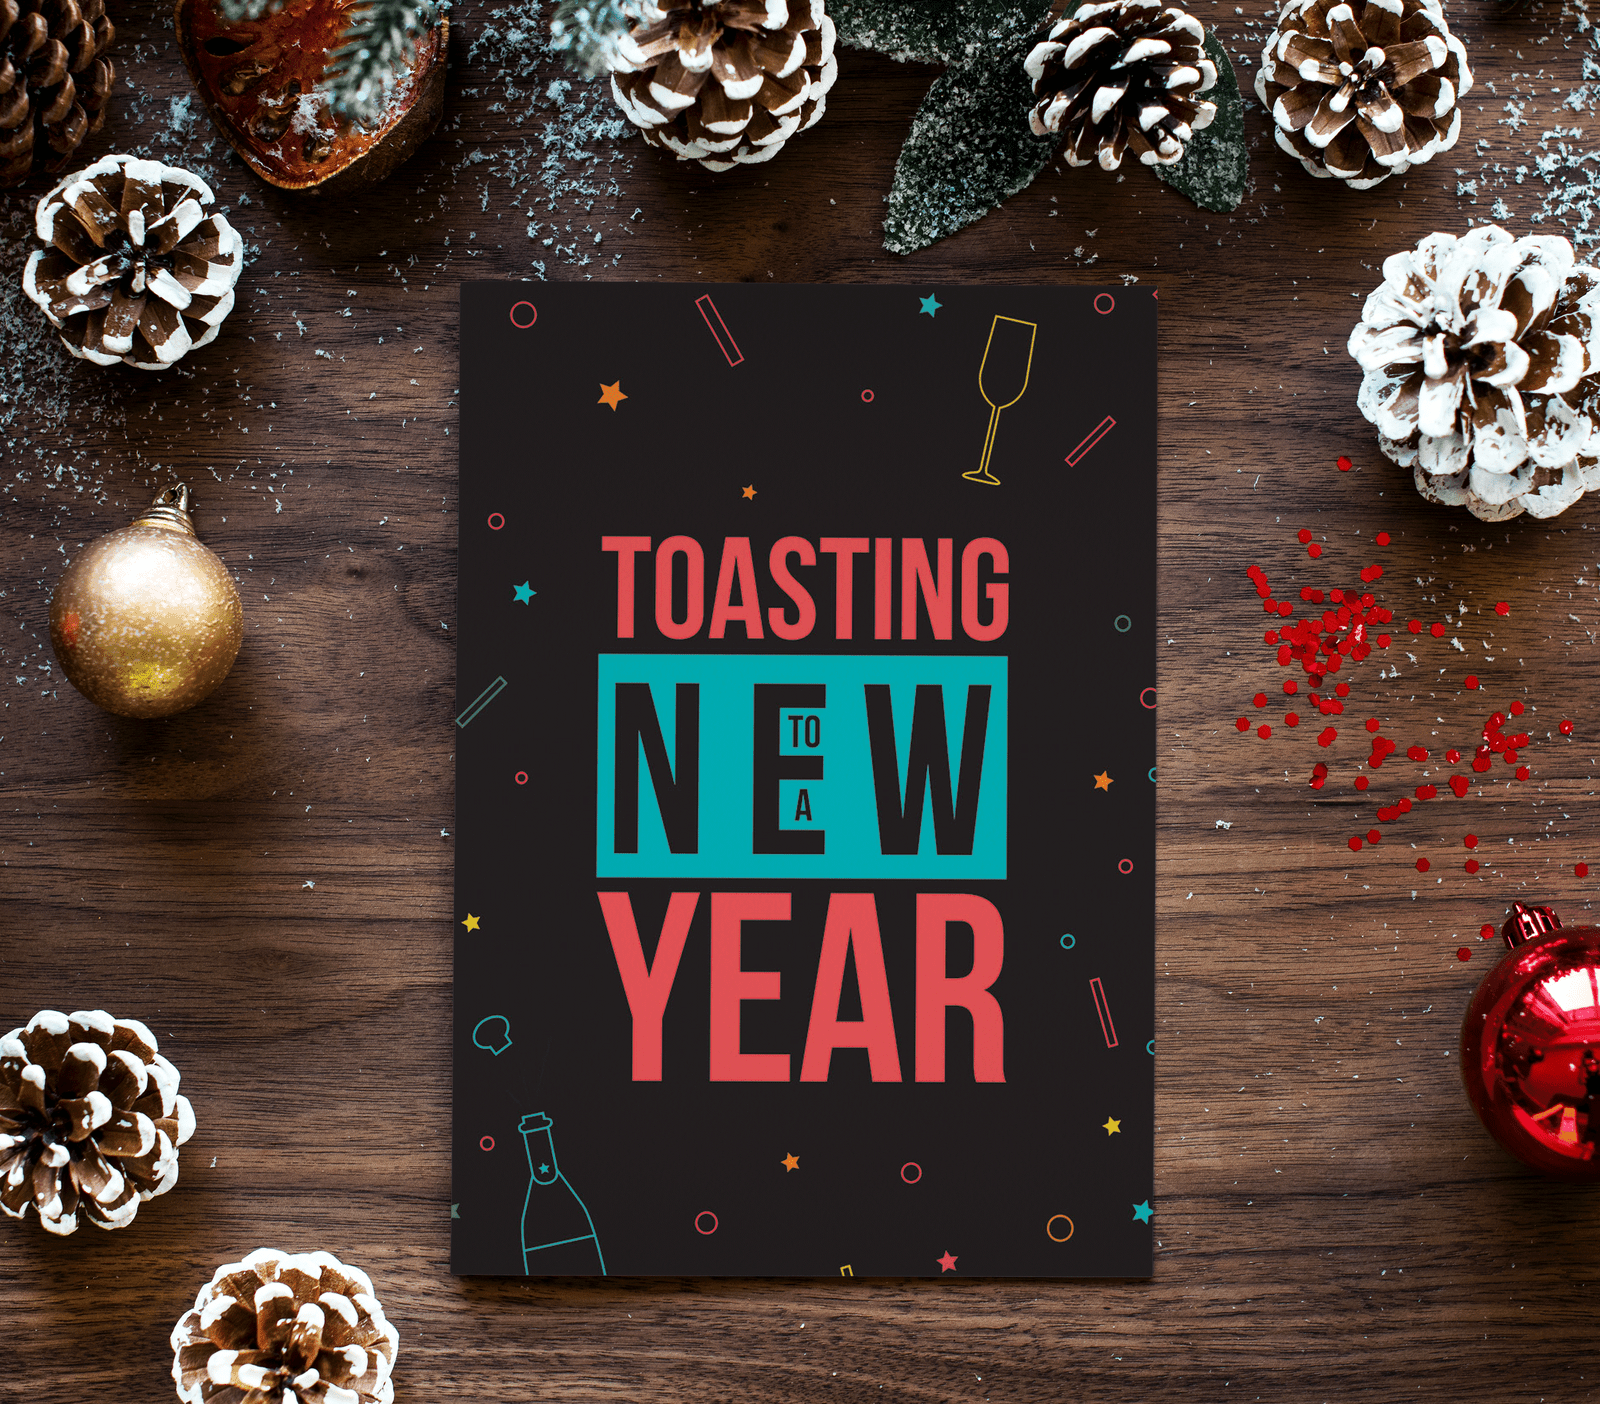 Toast to a New Year!